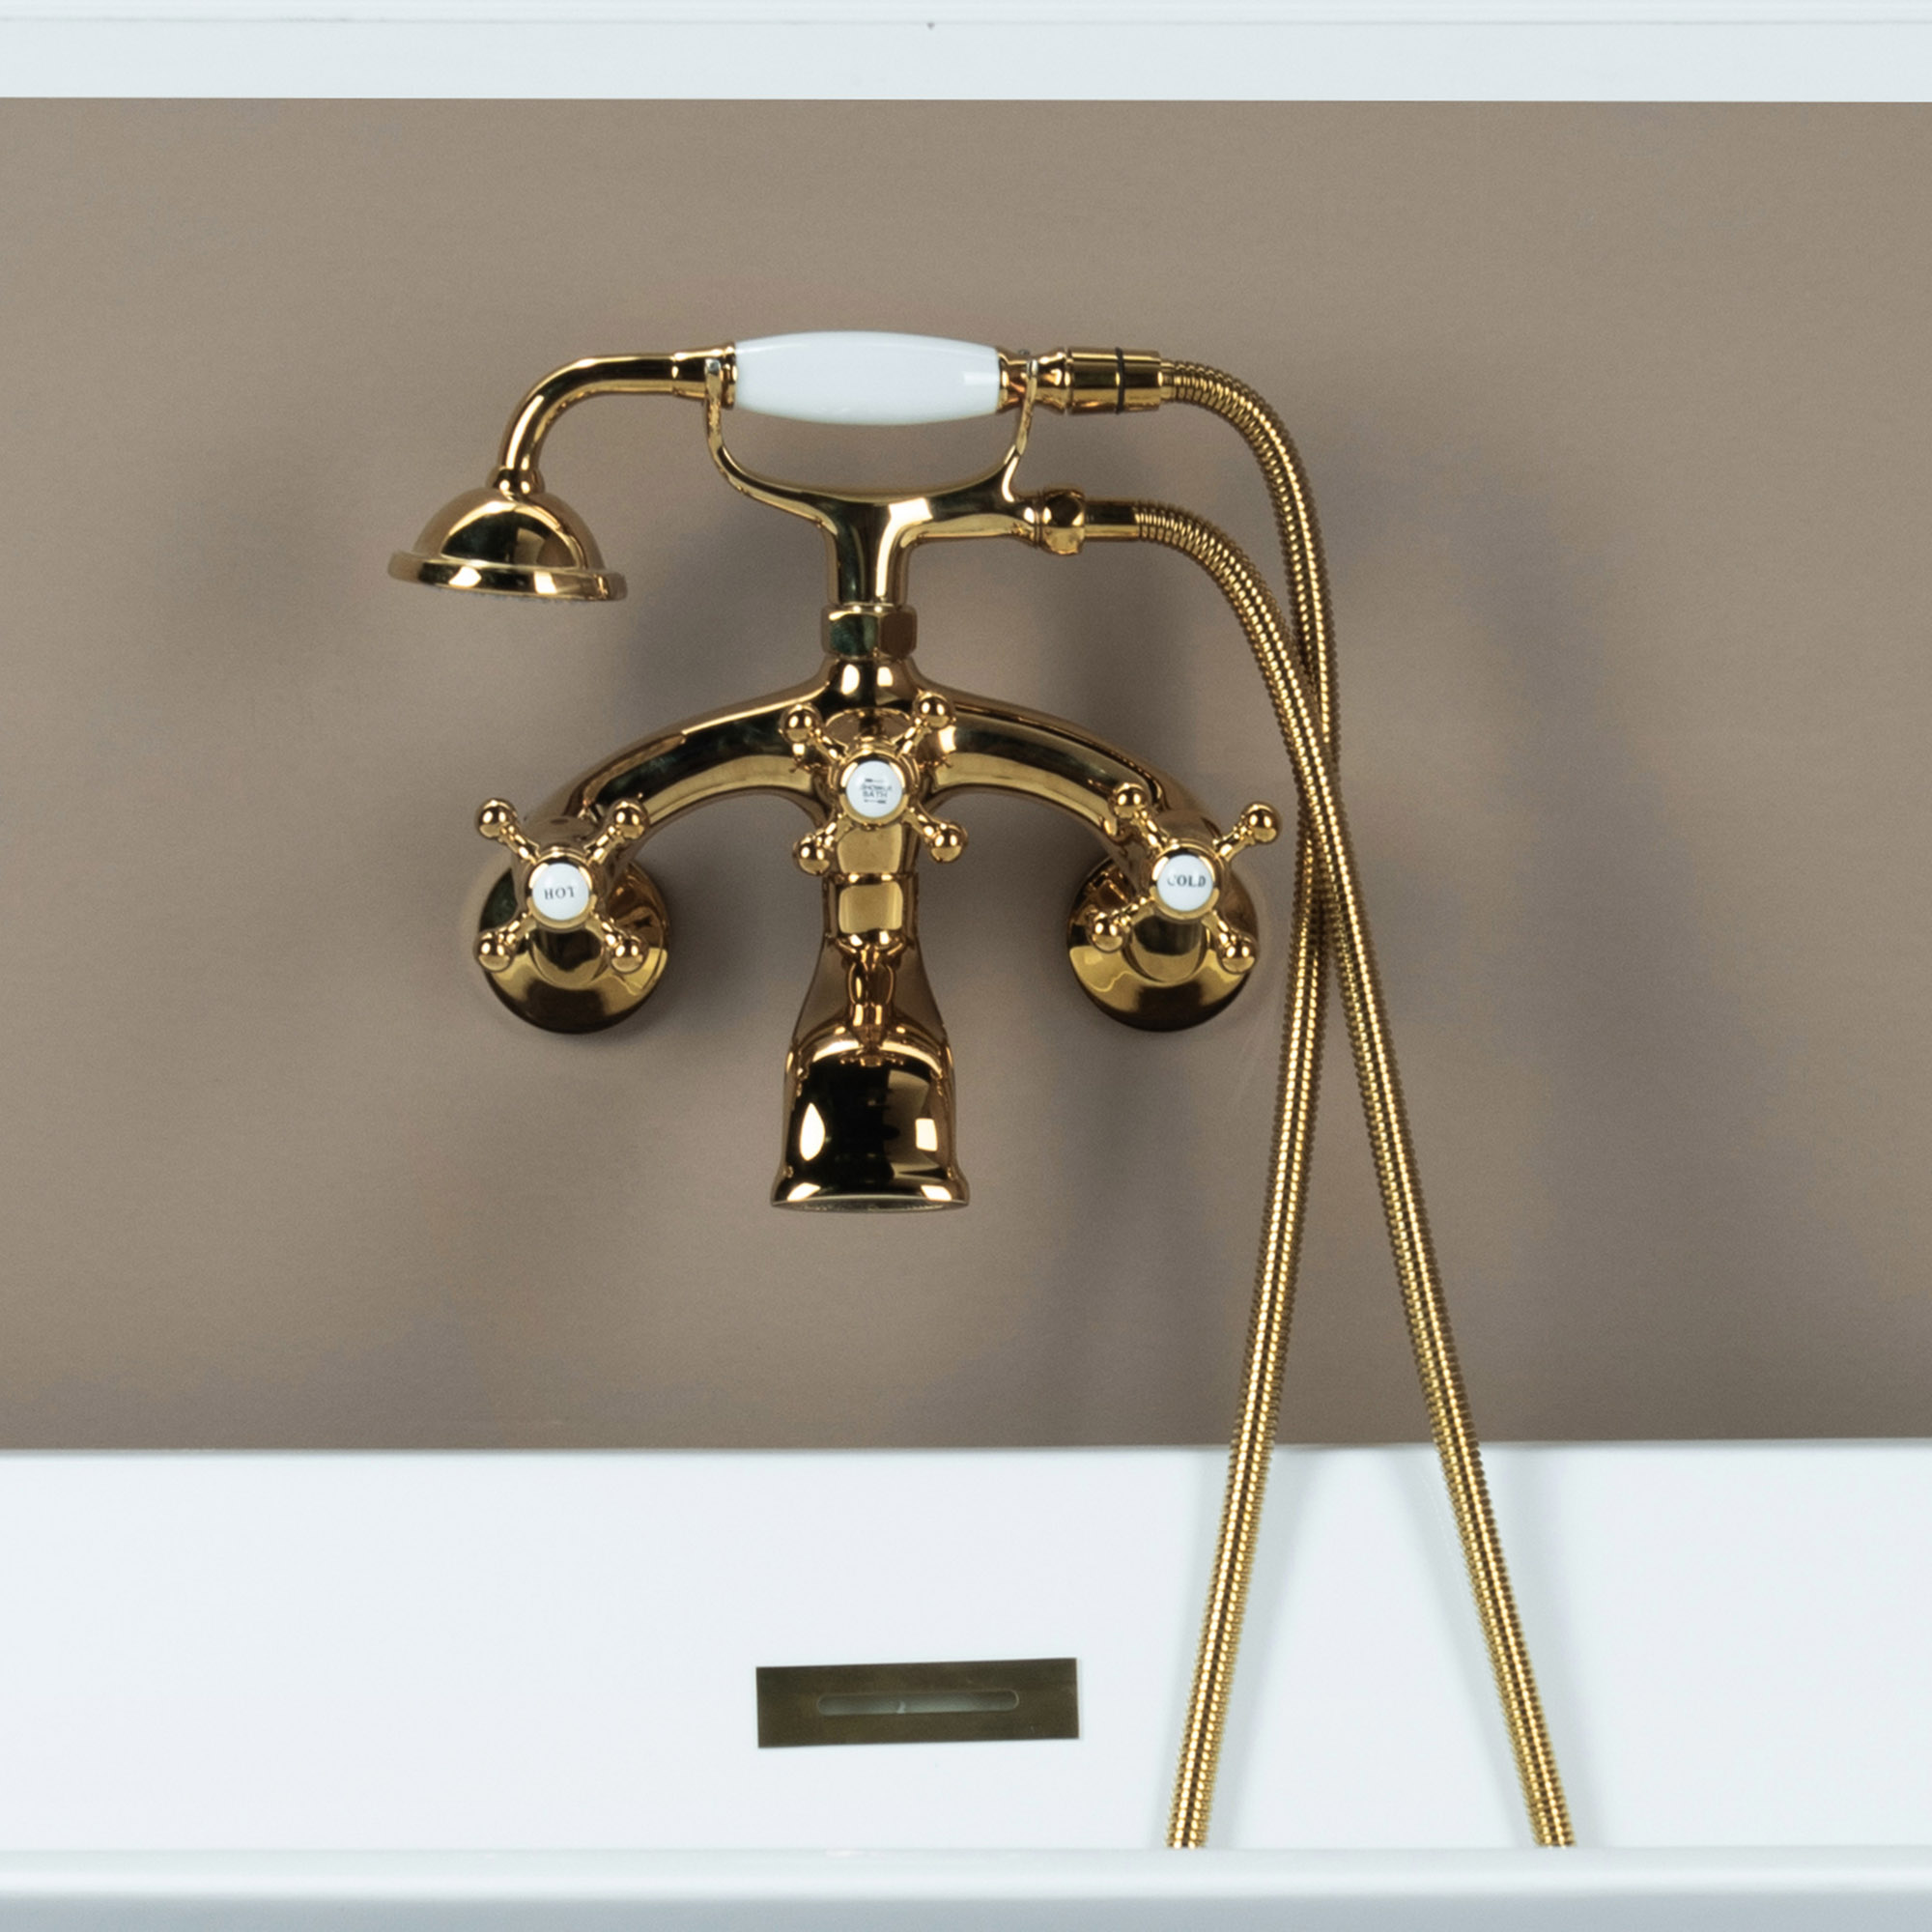 WOODBRIDGE F0034PG Dual Mounting Clawfoot Tub Filler Faucet with Hand Shower and Hose in Polished Gold